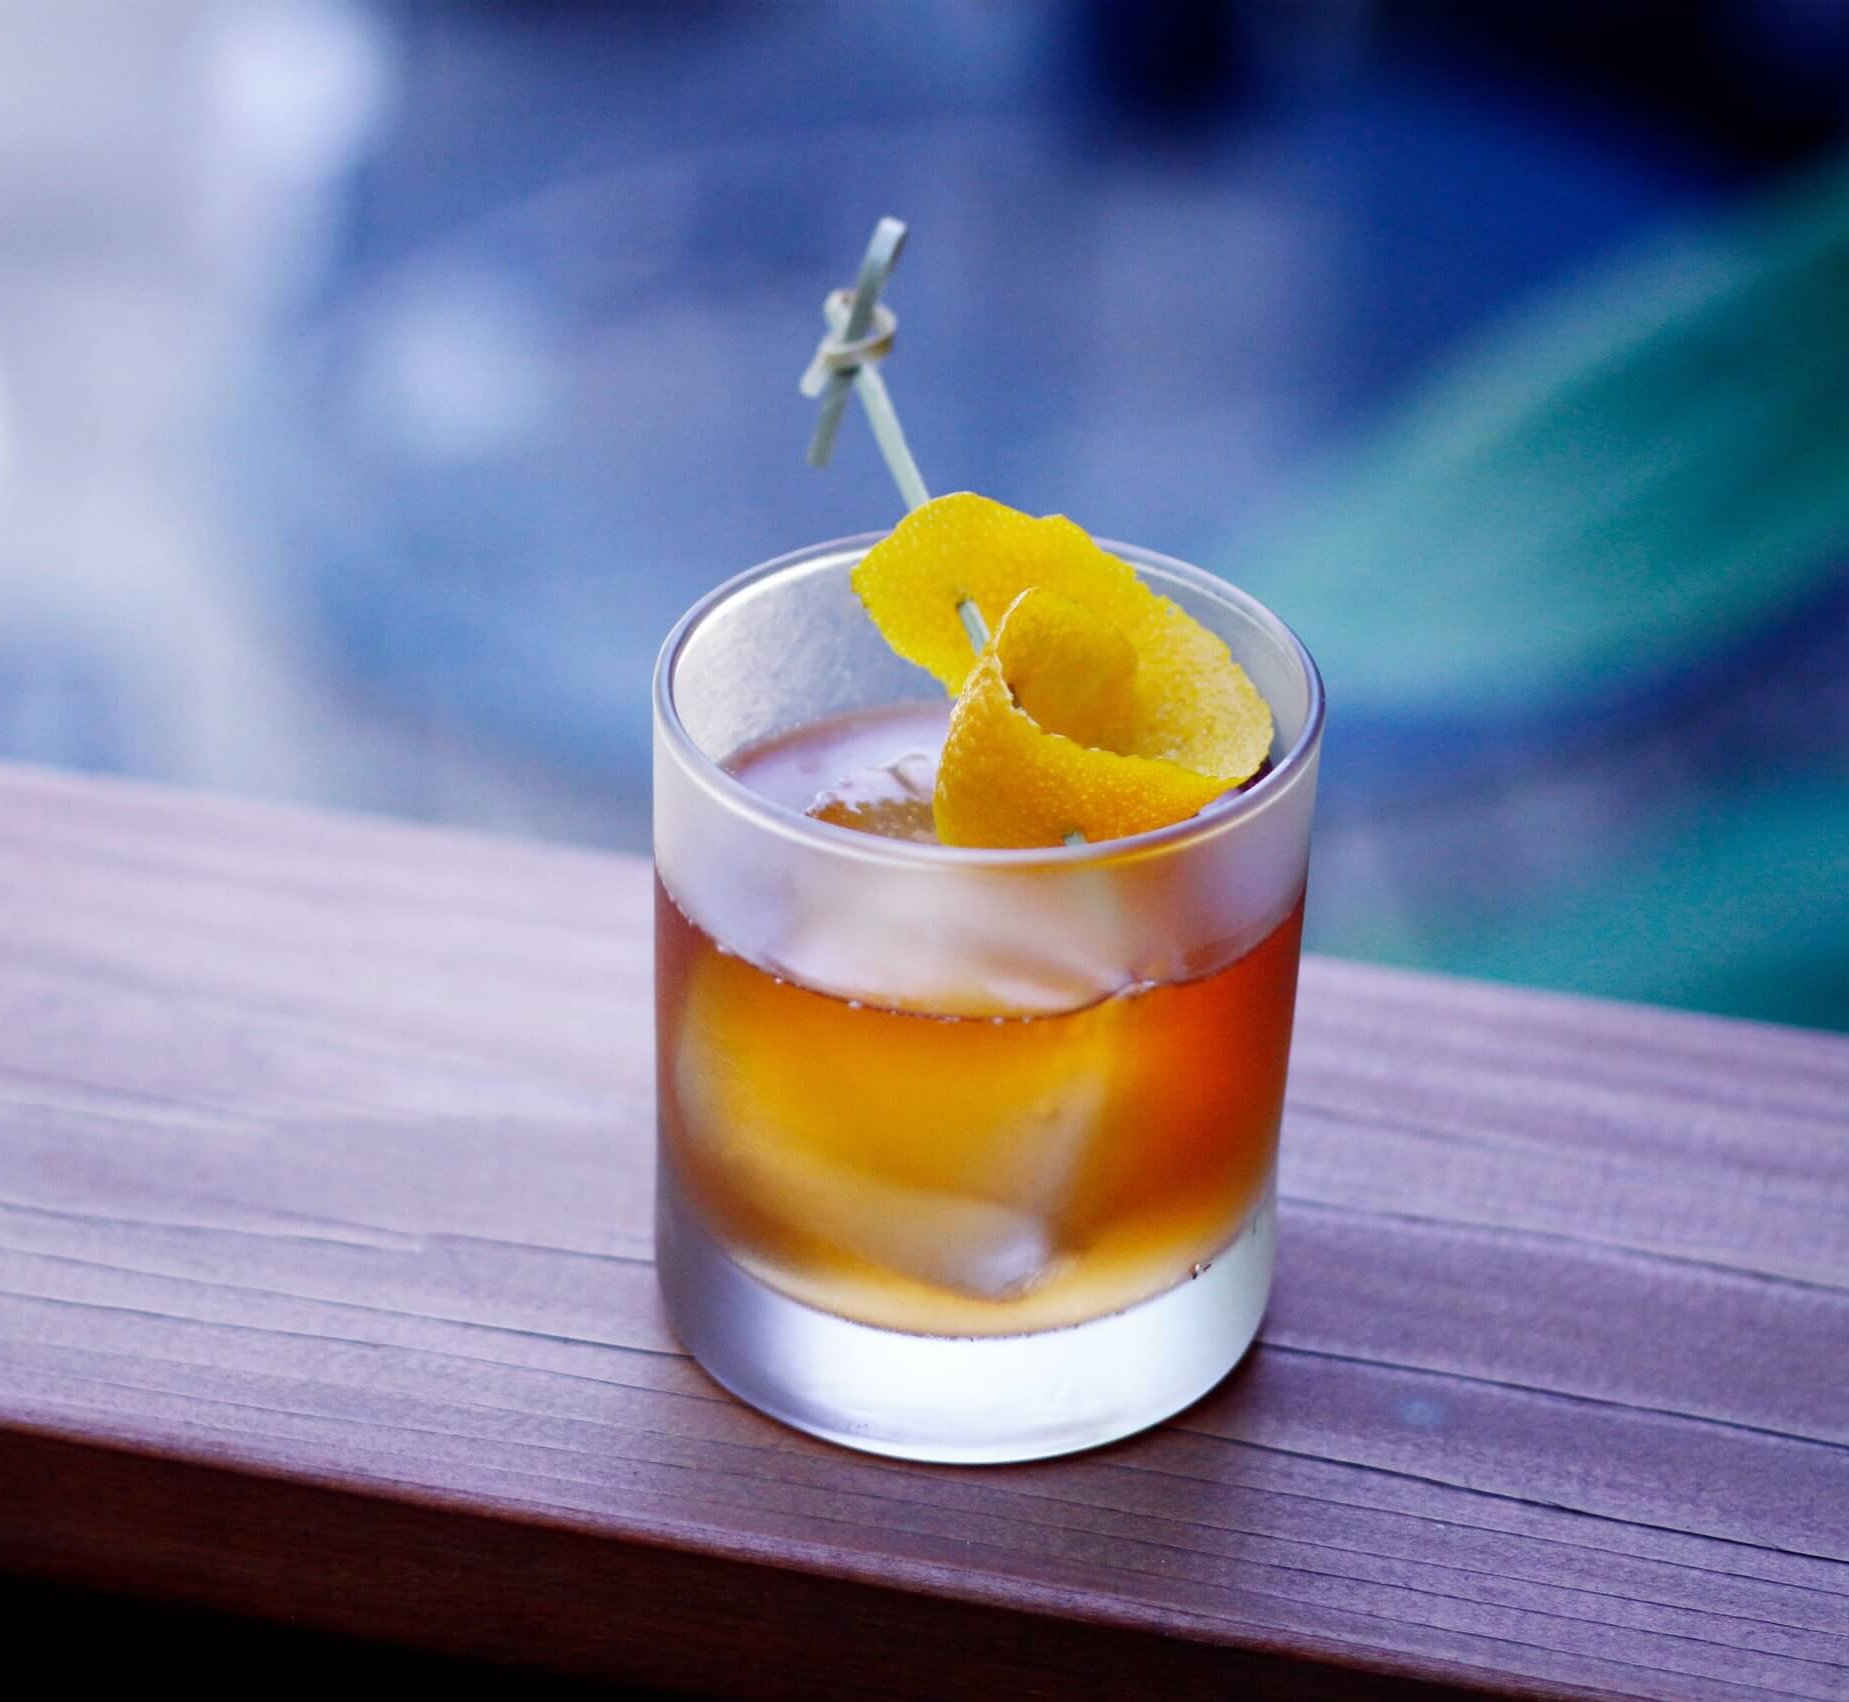 An old fashioned cocktail with an orange peel garnish on a wooden surface.